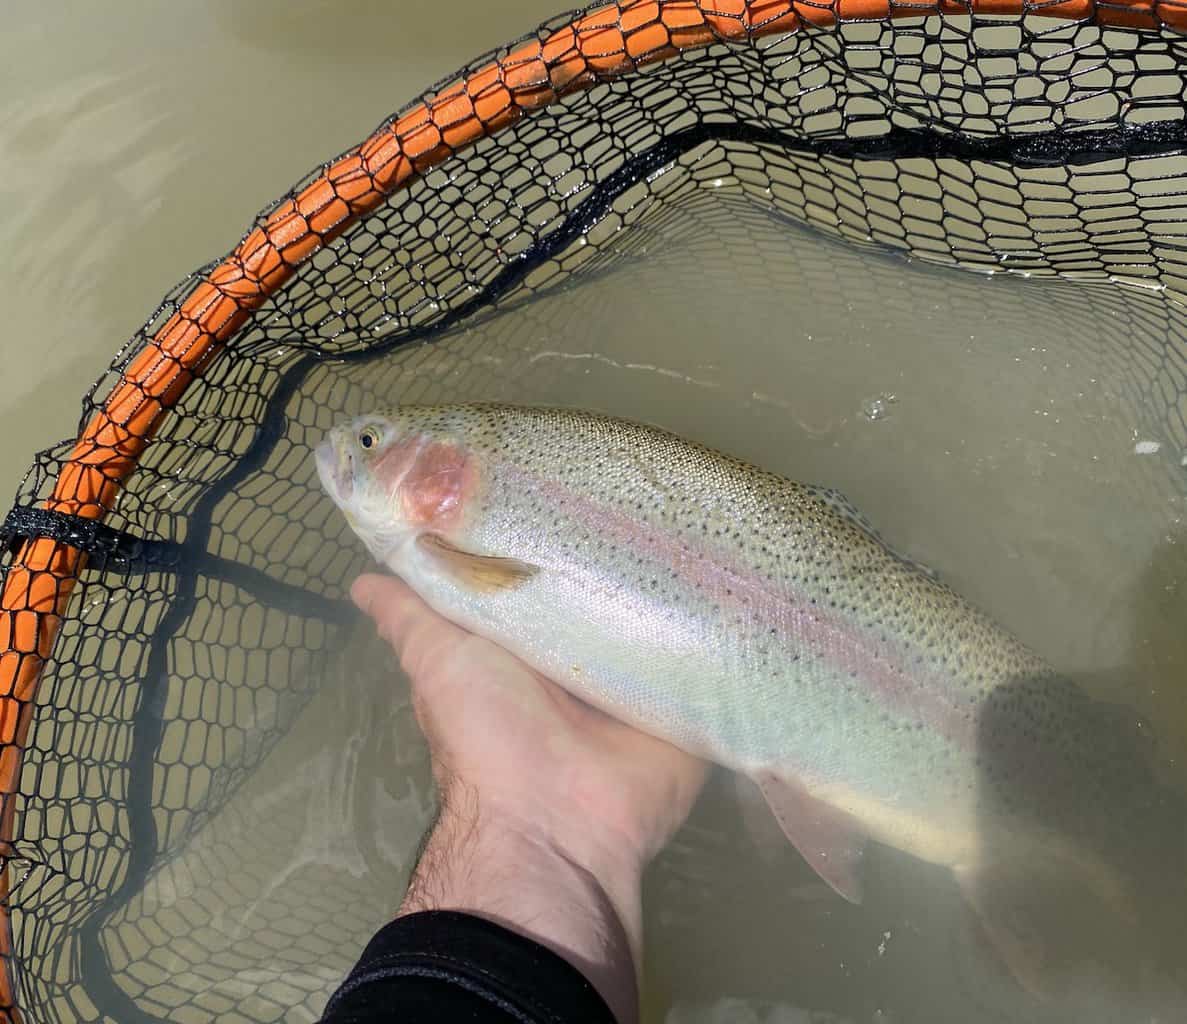 Freshly caught rainbow trout in a landing net at the Lower Illinois River.